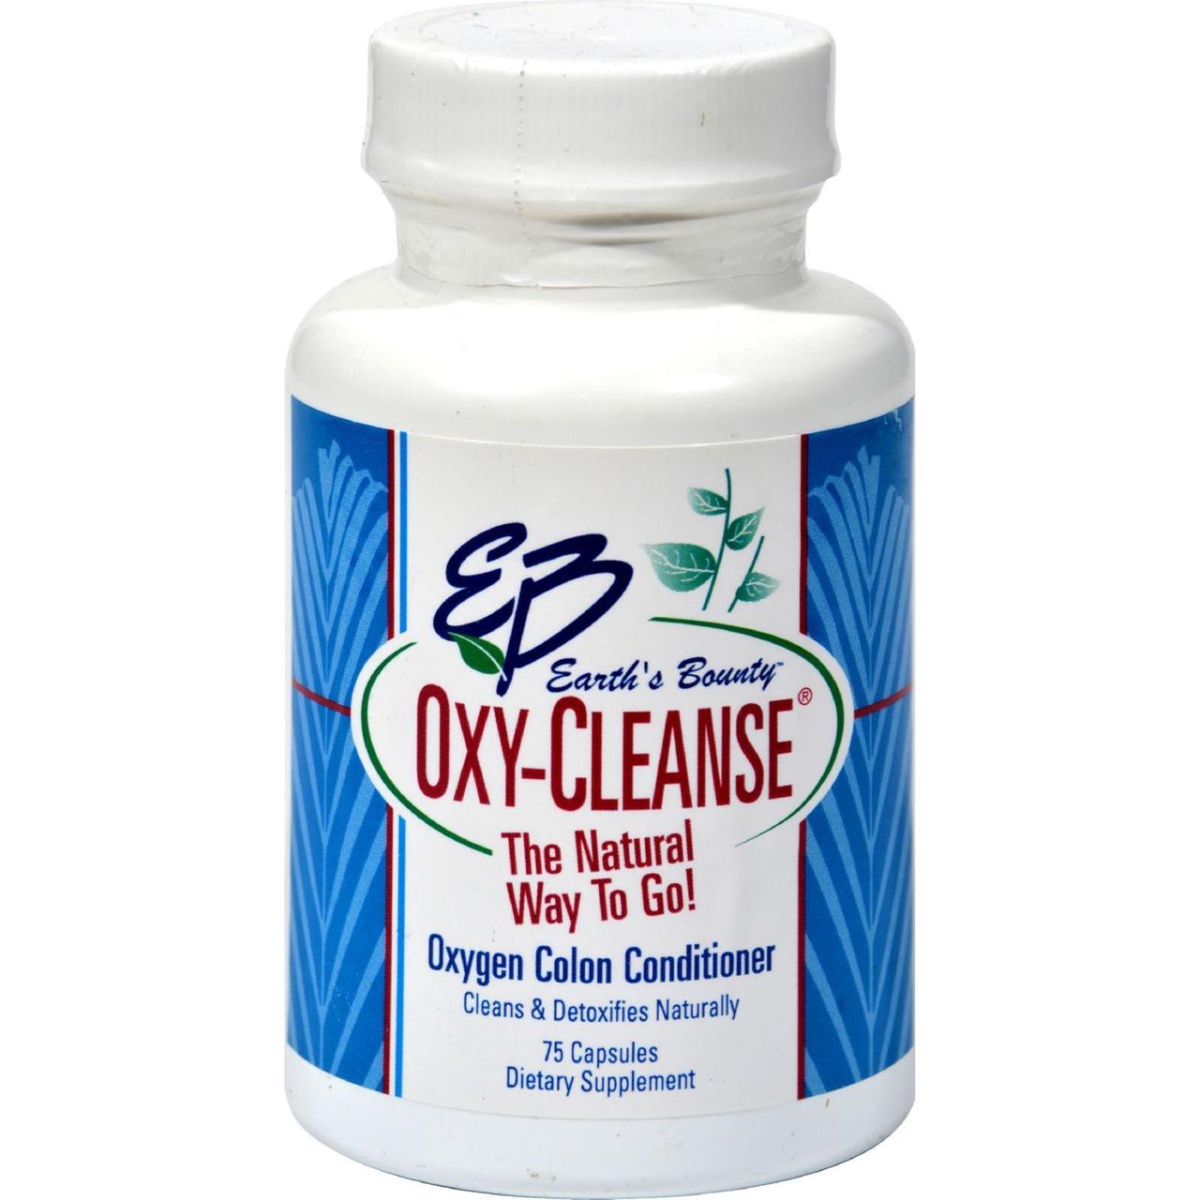 Hg0943092 600 Mg Oxy-cleanse, 75 Capsules